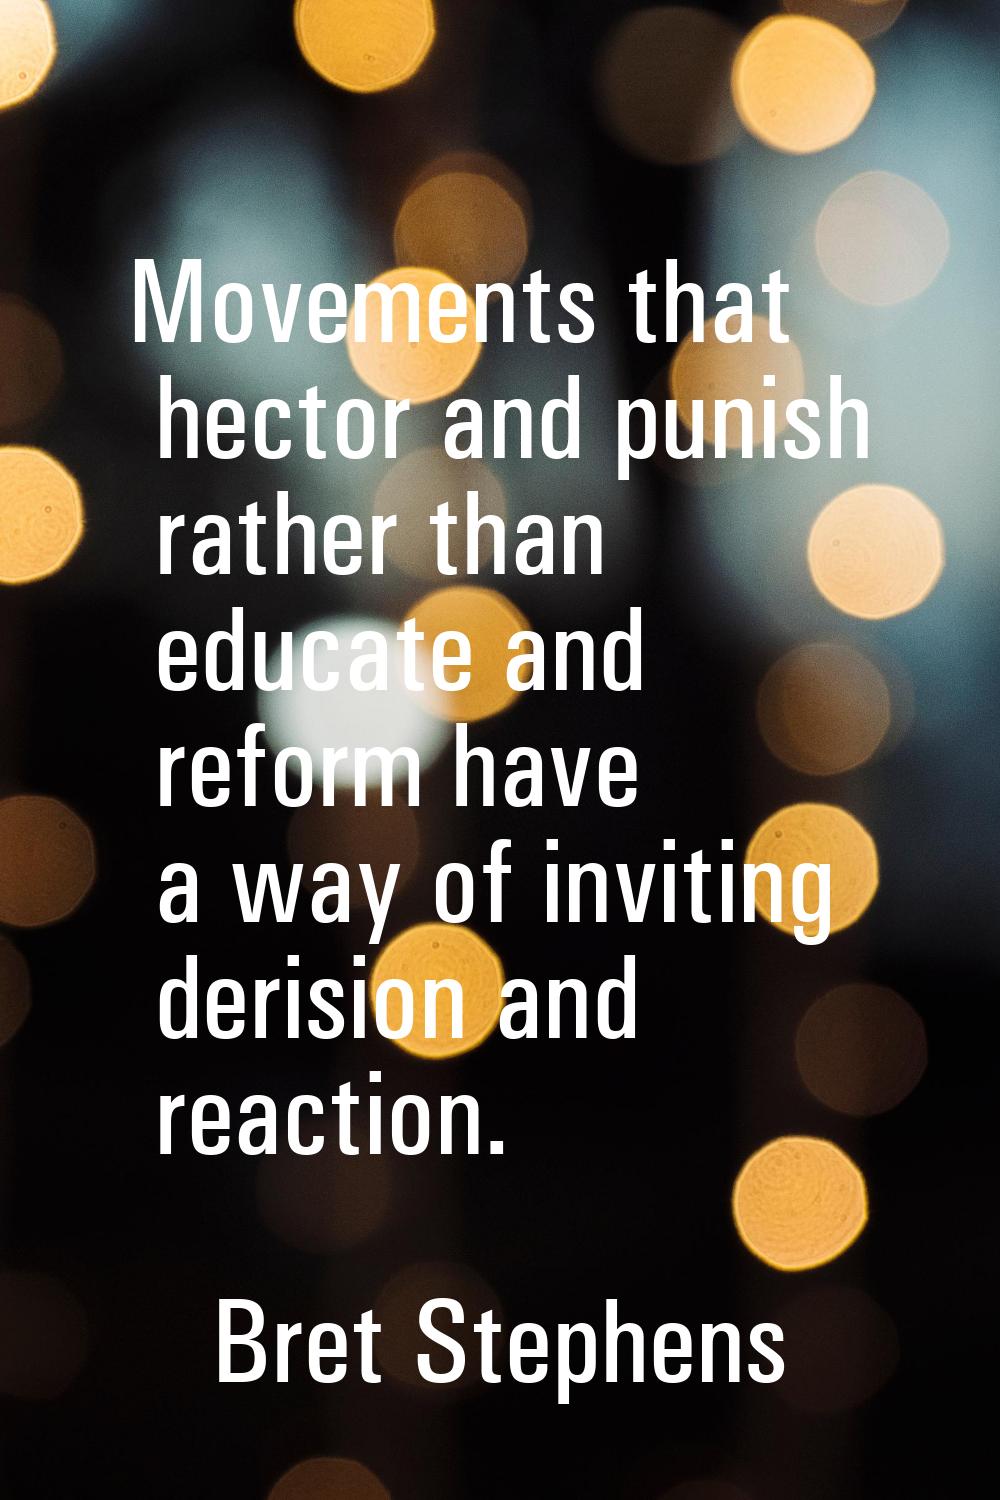 Movements that hector and punish rather than educate and reform have a way of inviting derision and